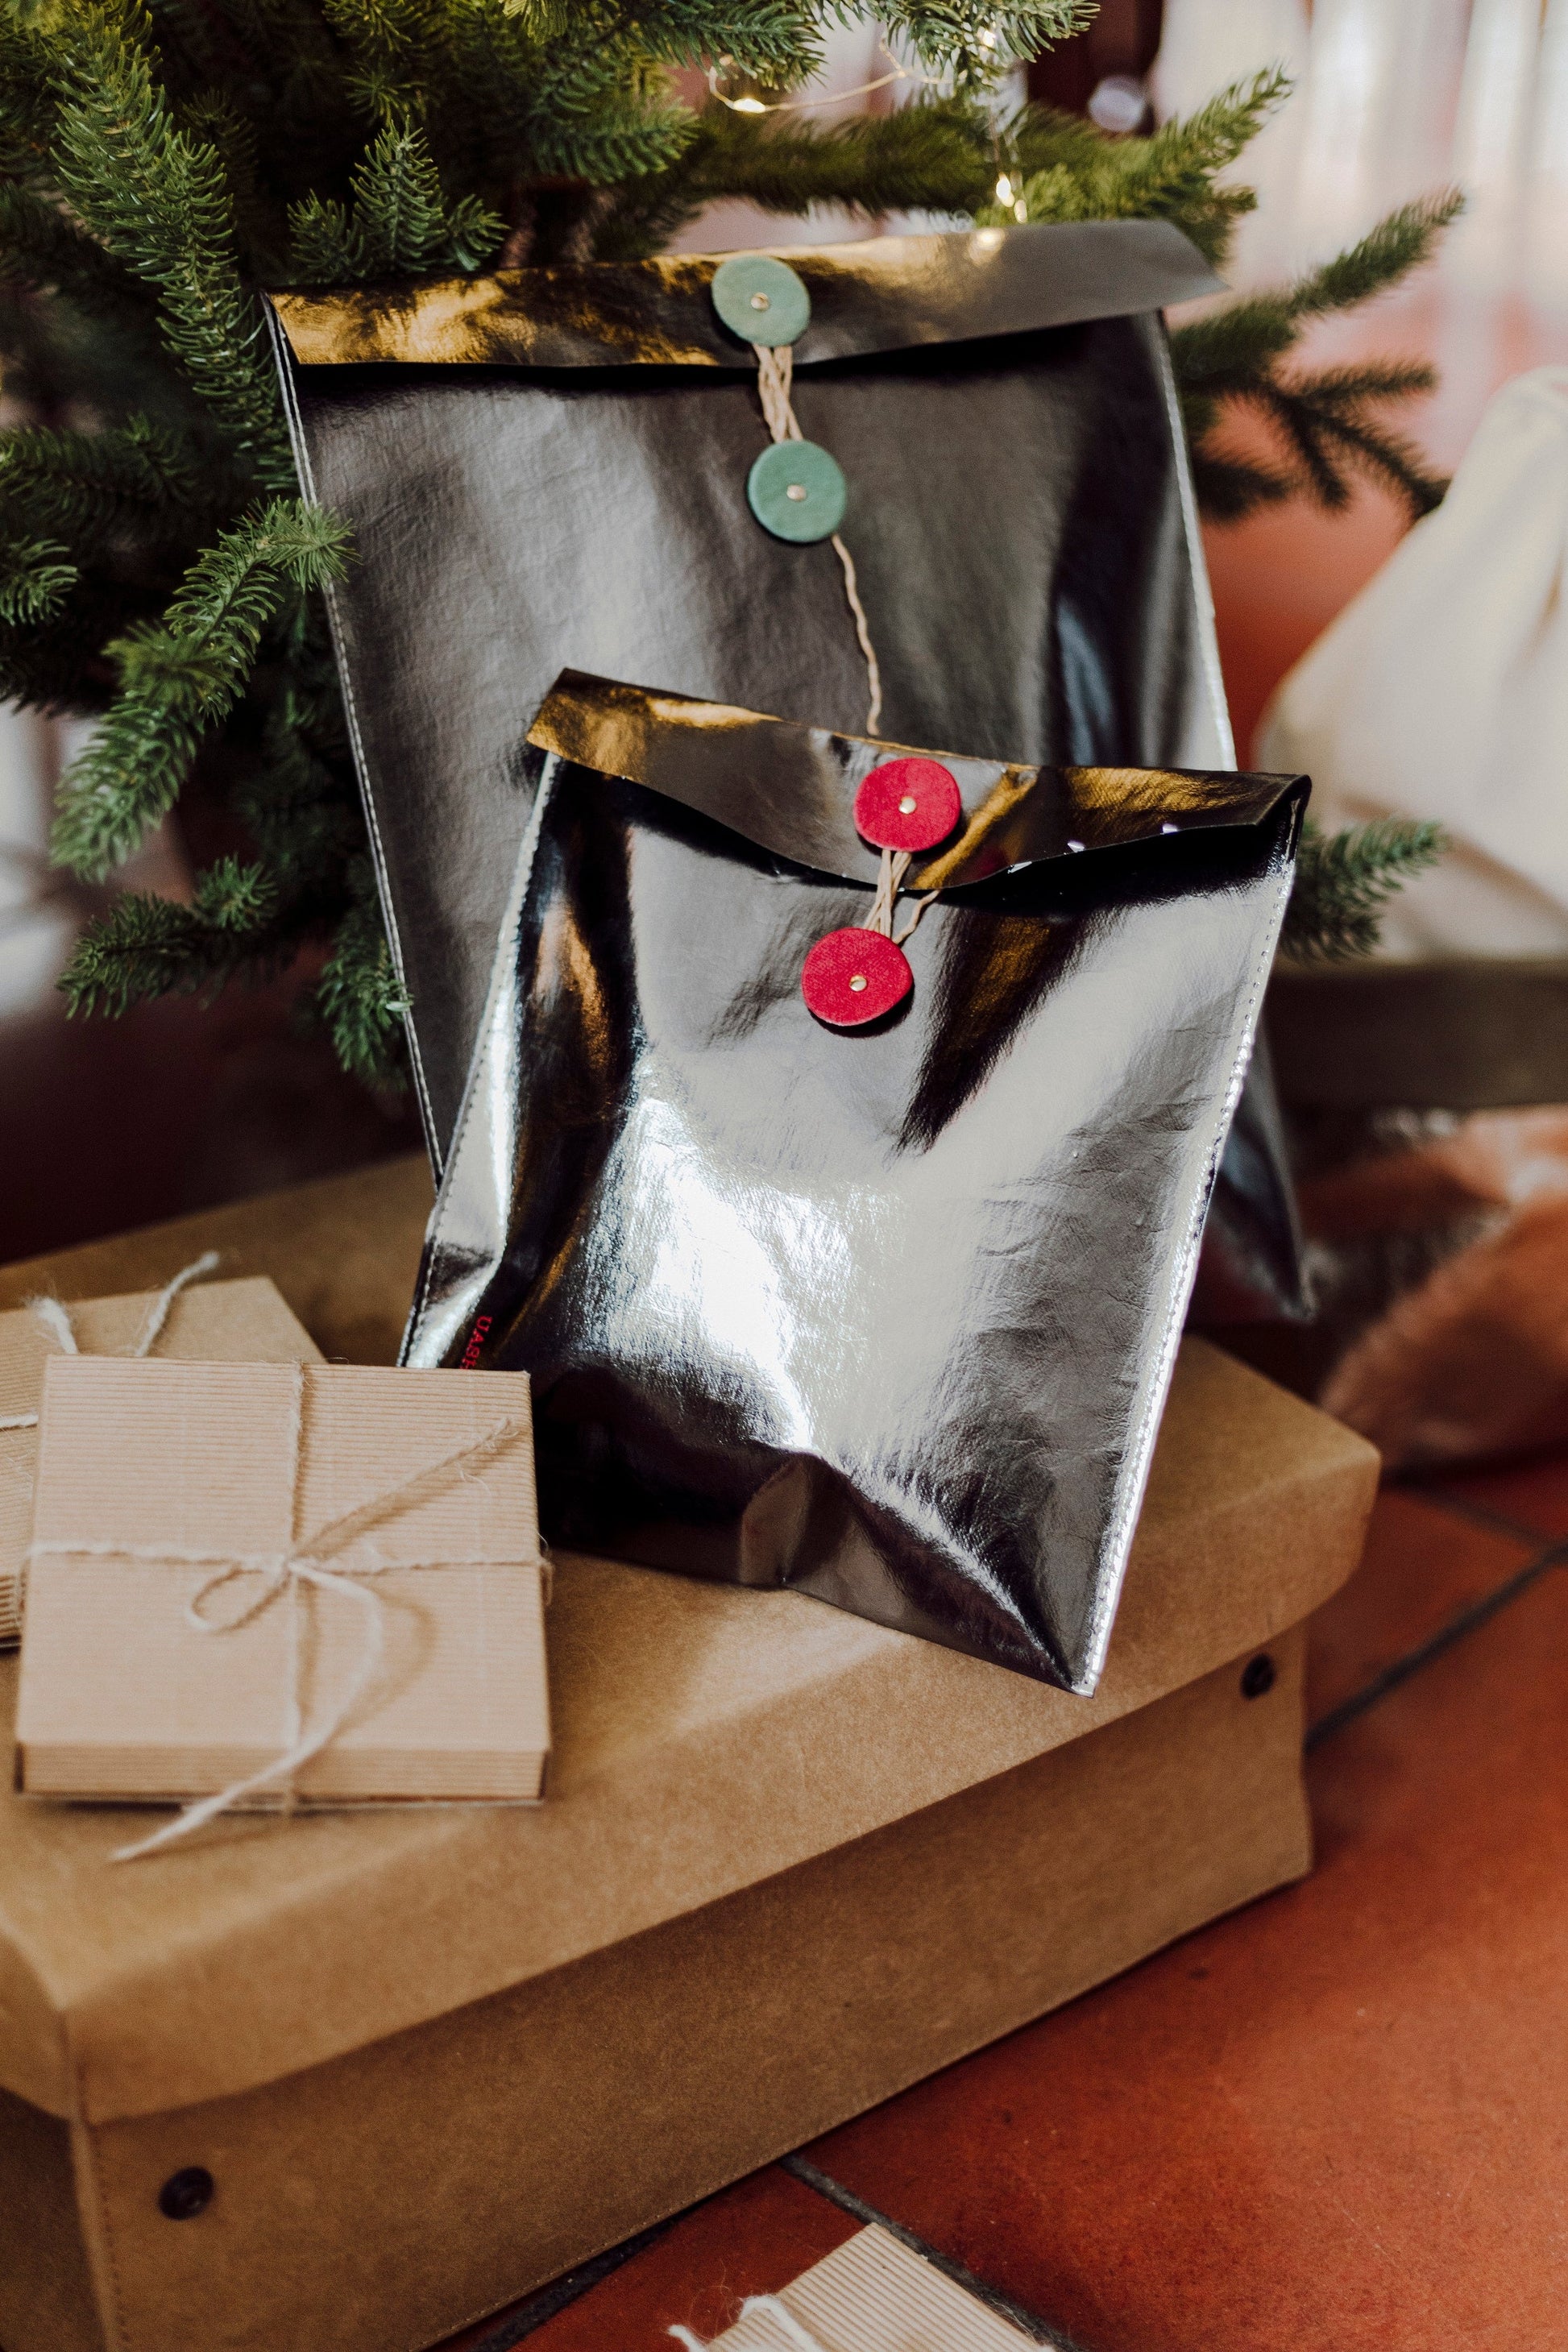 Two pewter metallic gift pouches with twine closures (one red, one green) sit in front of each other atop a washable paper lidded box. A Christmas tree is at the rear of the image.